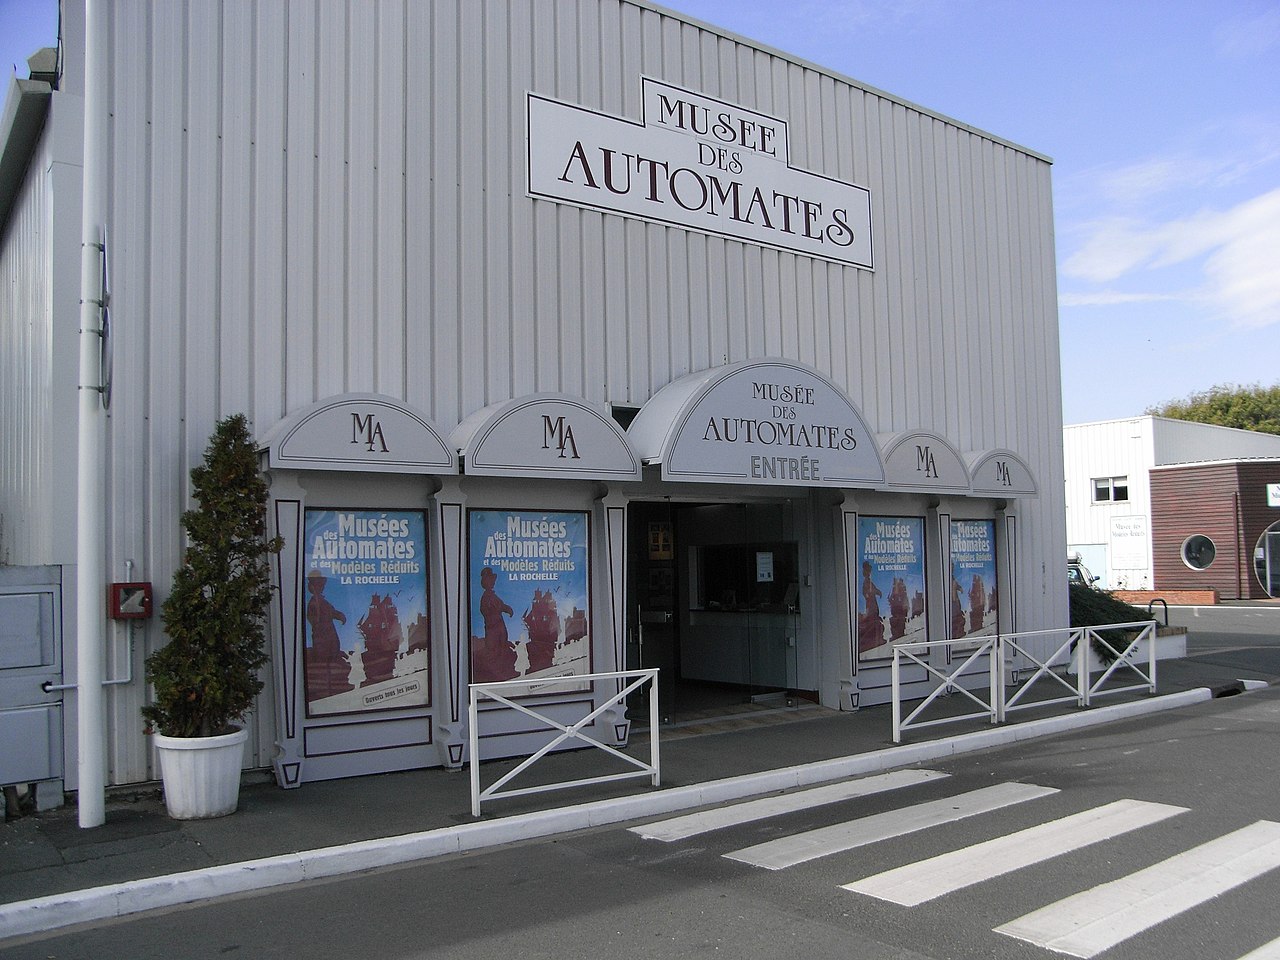 The Museum of Automata and Scale Models of La Rochelle